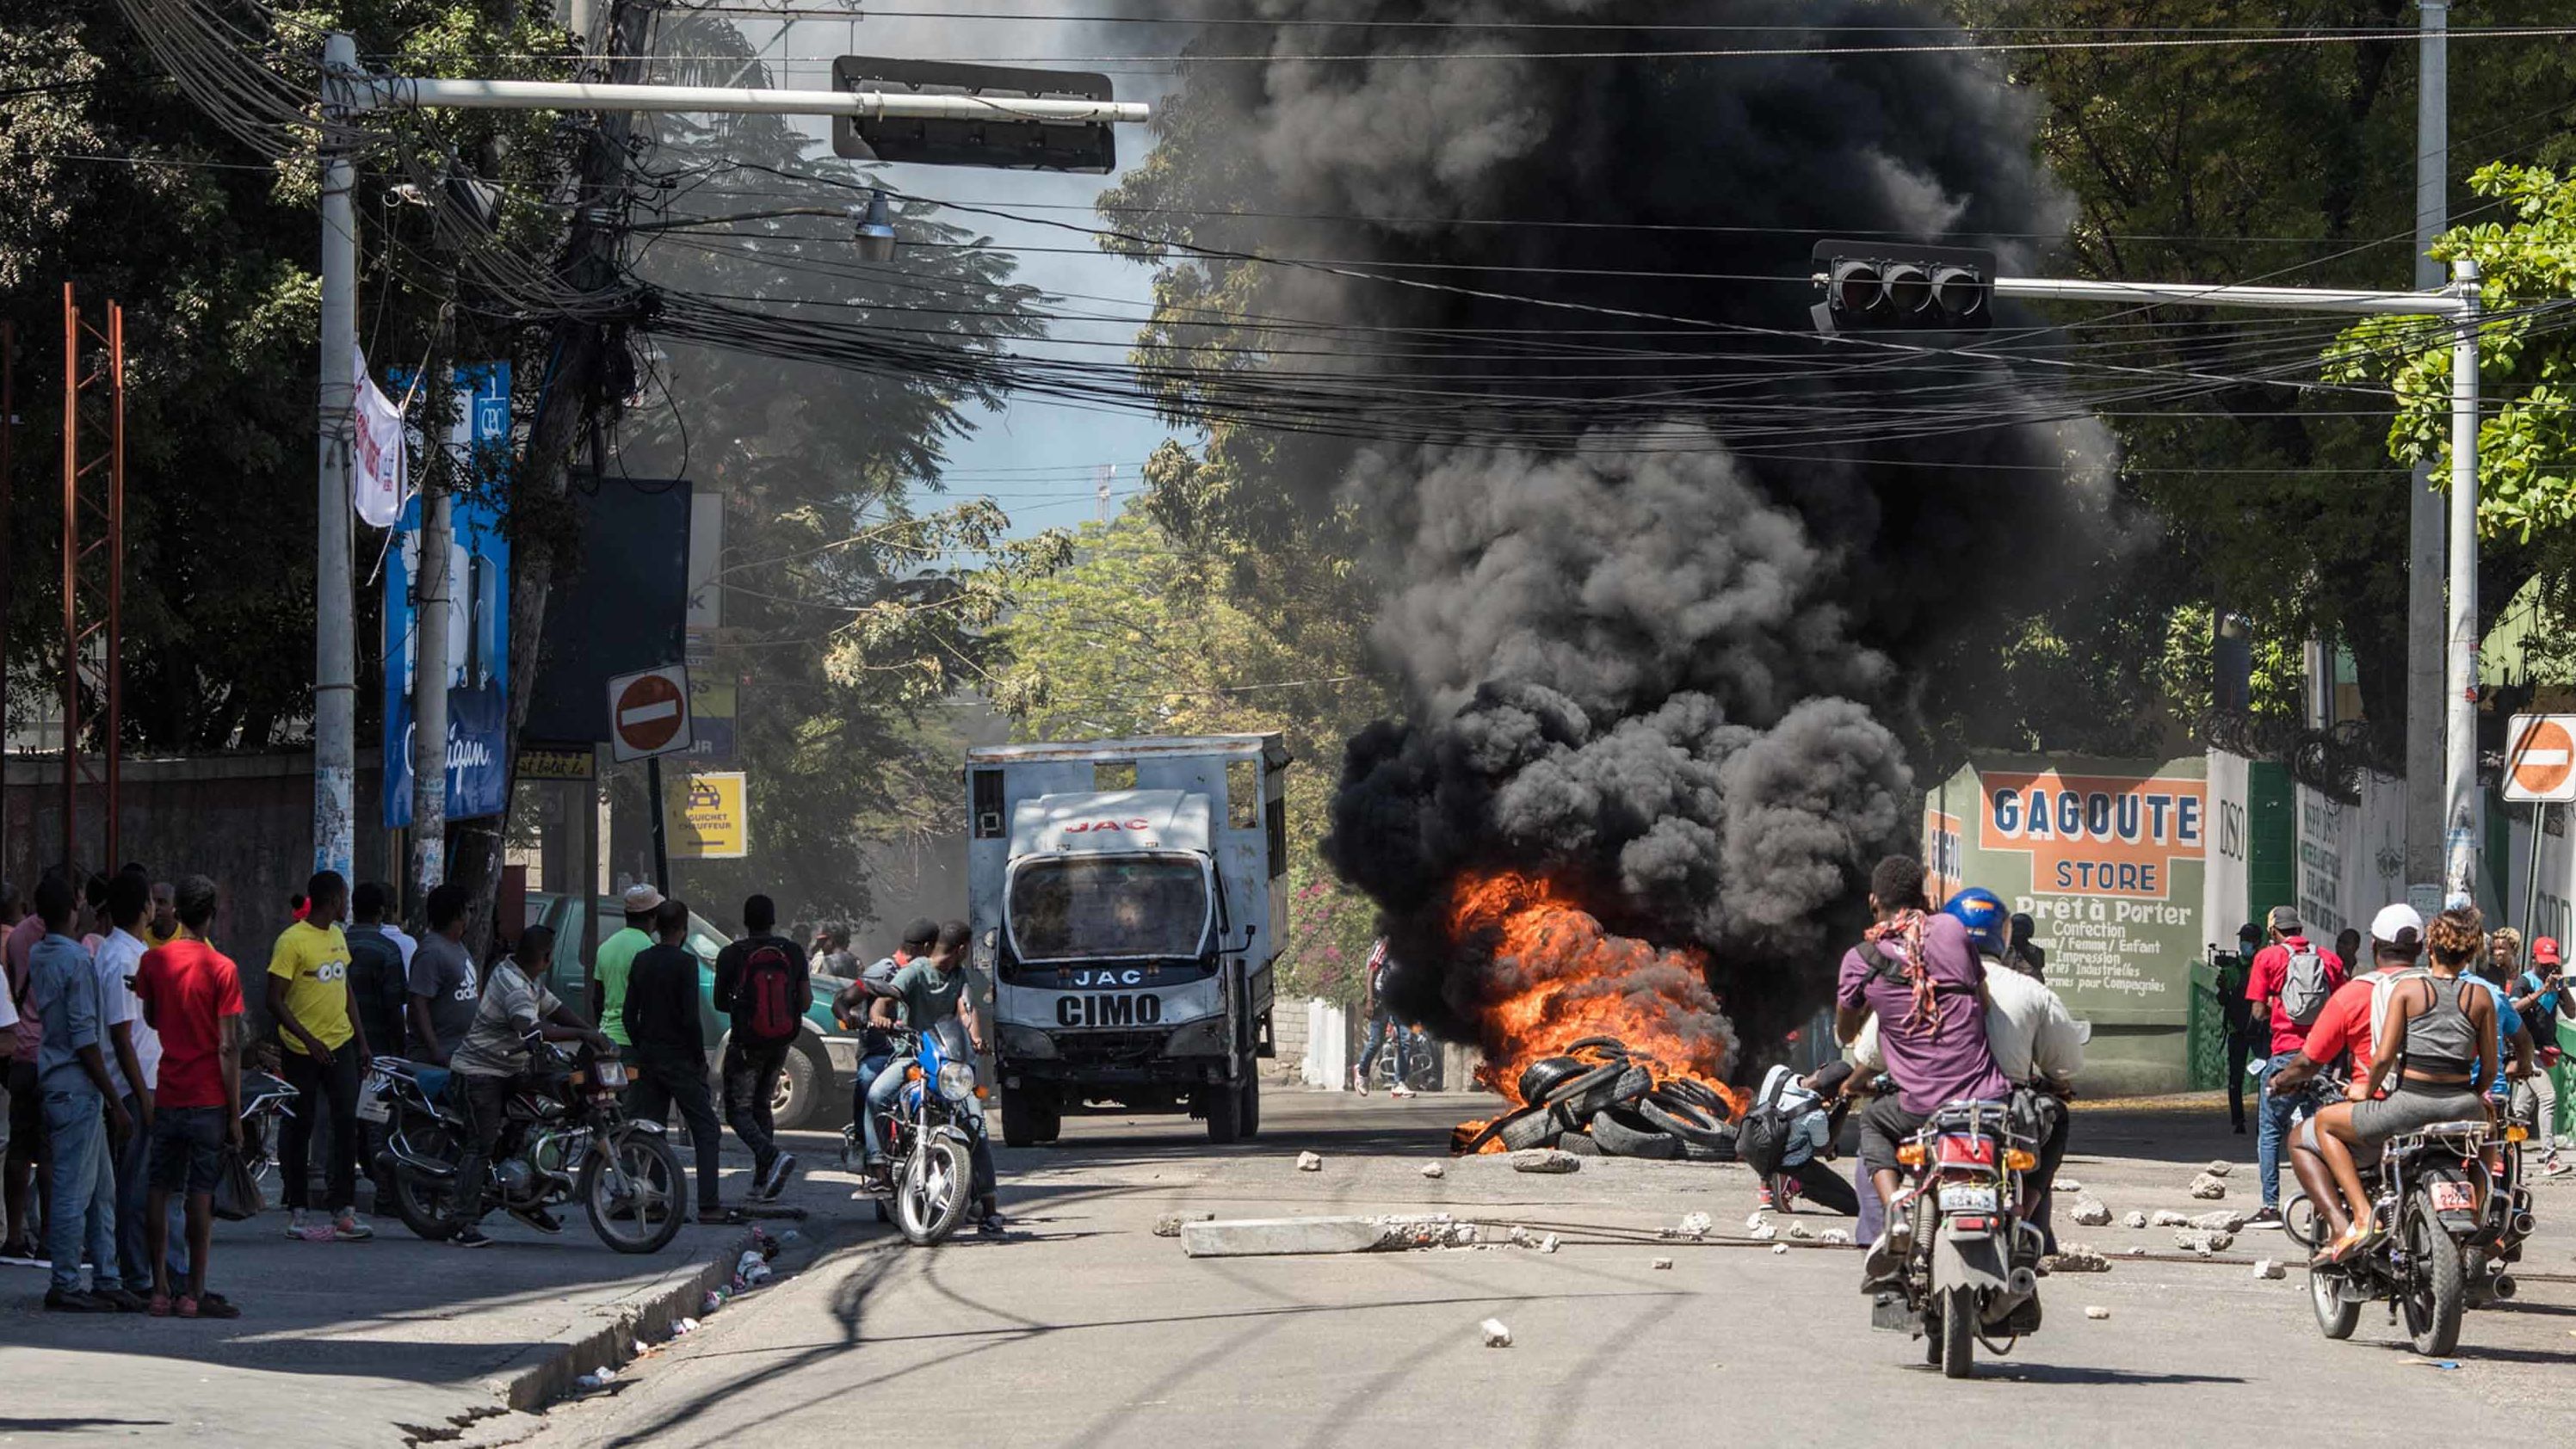 Tires are set ablaze during a march in Port-au-Prince on February 10, 2021, to protest against the government of President Jovenel Moise.